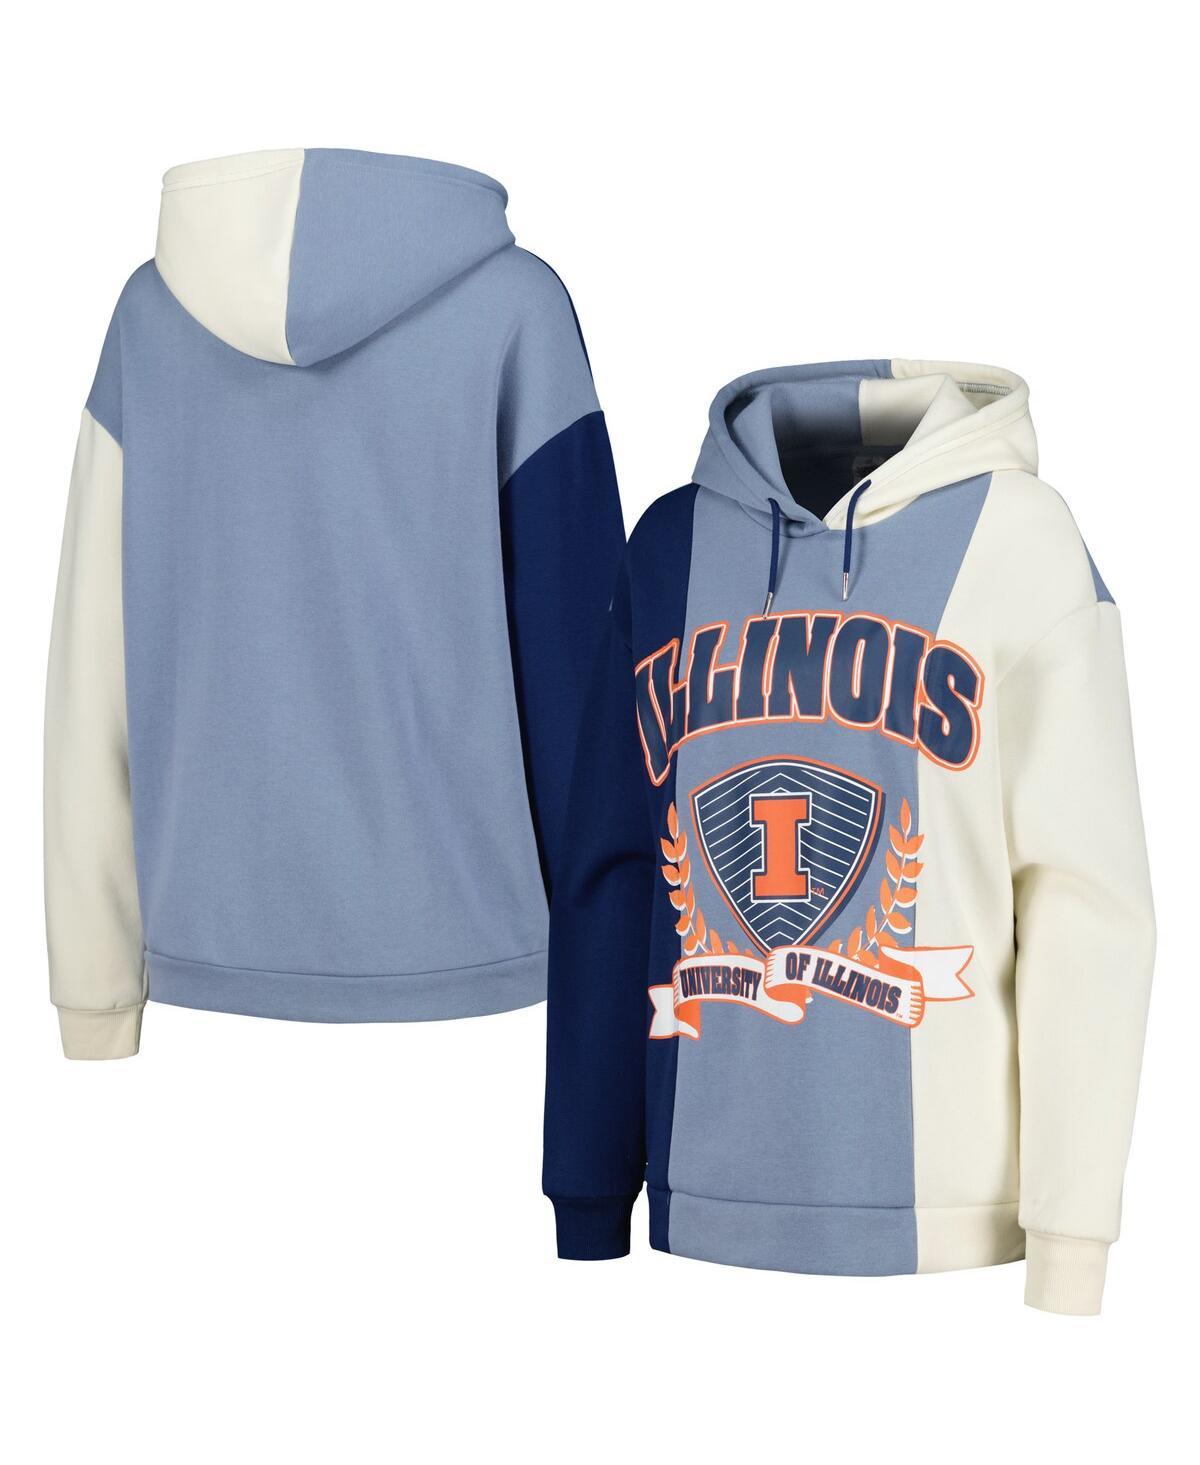 Women's Gameday Couture Navy Illinois Fighting Illini Hall of Fame Colorblock Pullover Hoodie - Navy